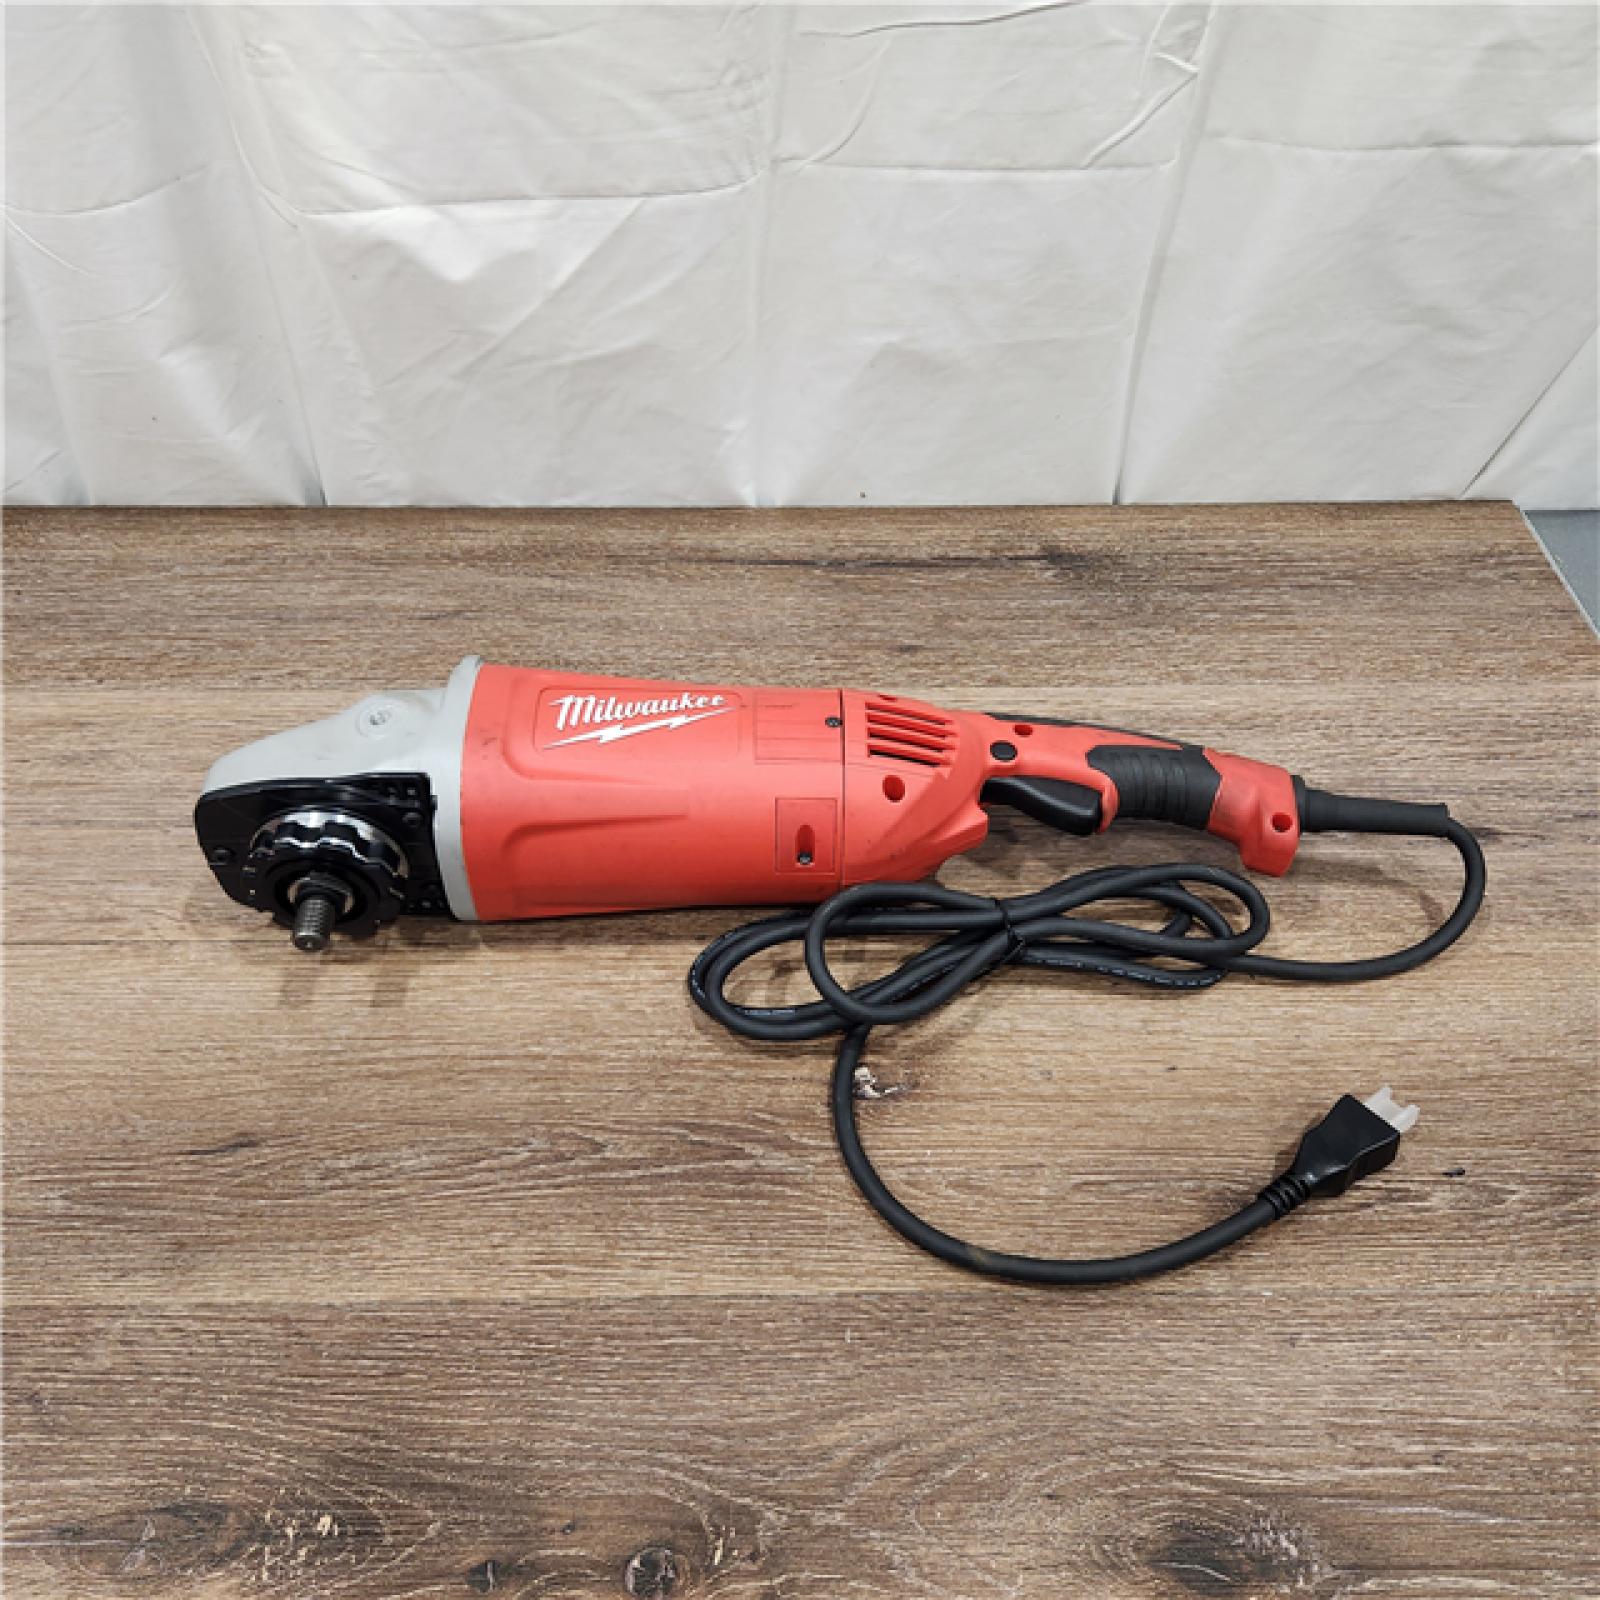 AS-IS 15 Amp 7/9 in. Large Angle Grinder with Trigger Lock-On Switch